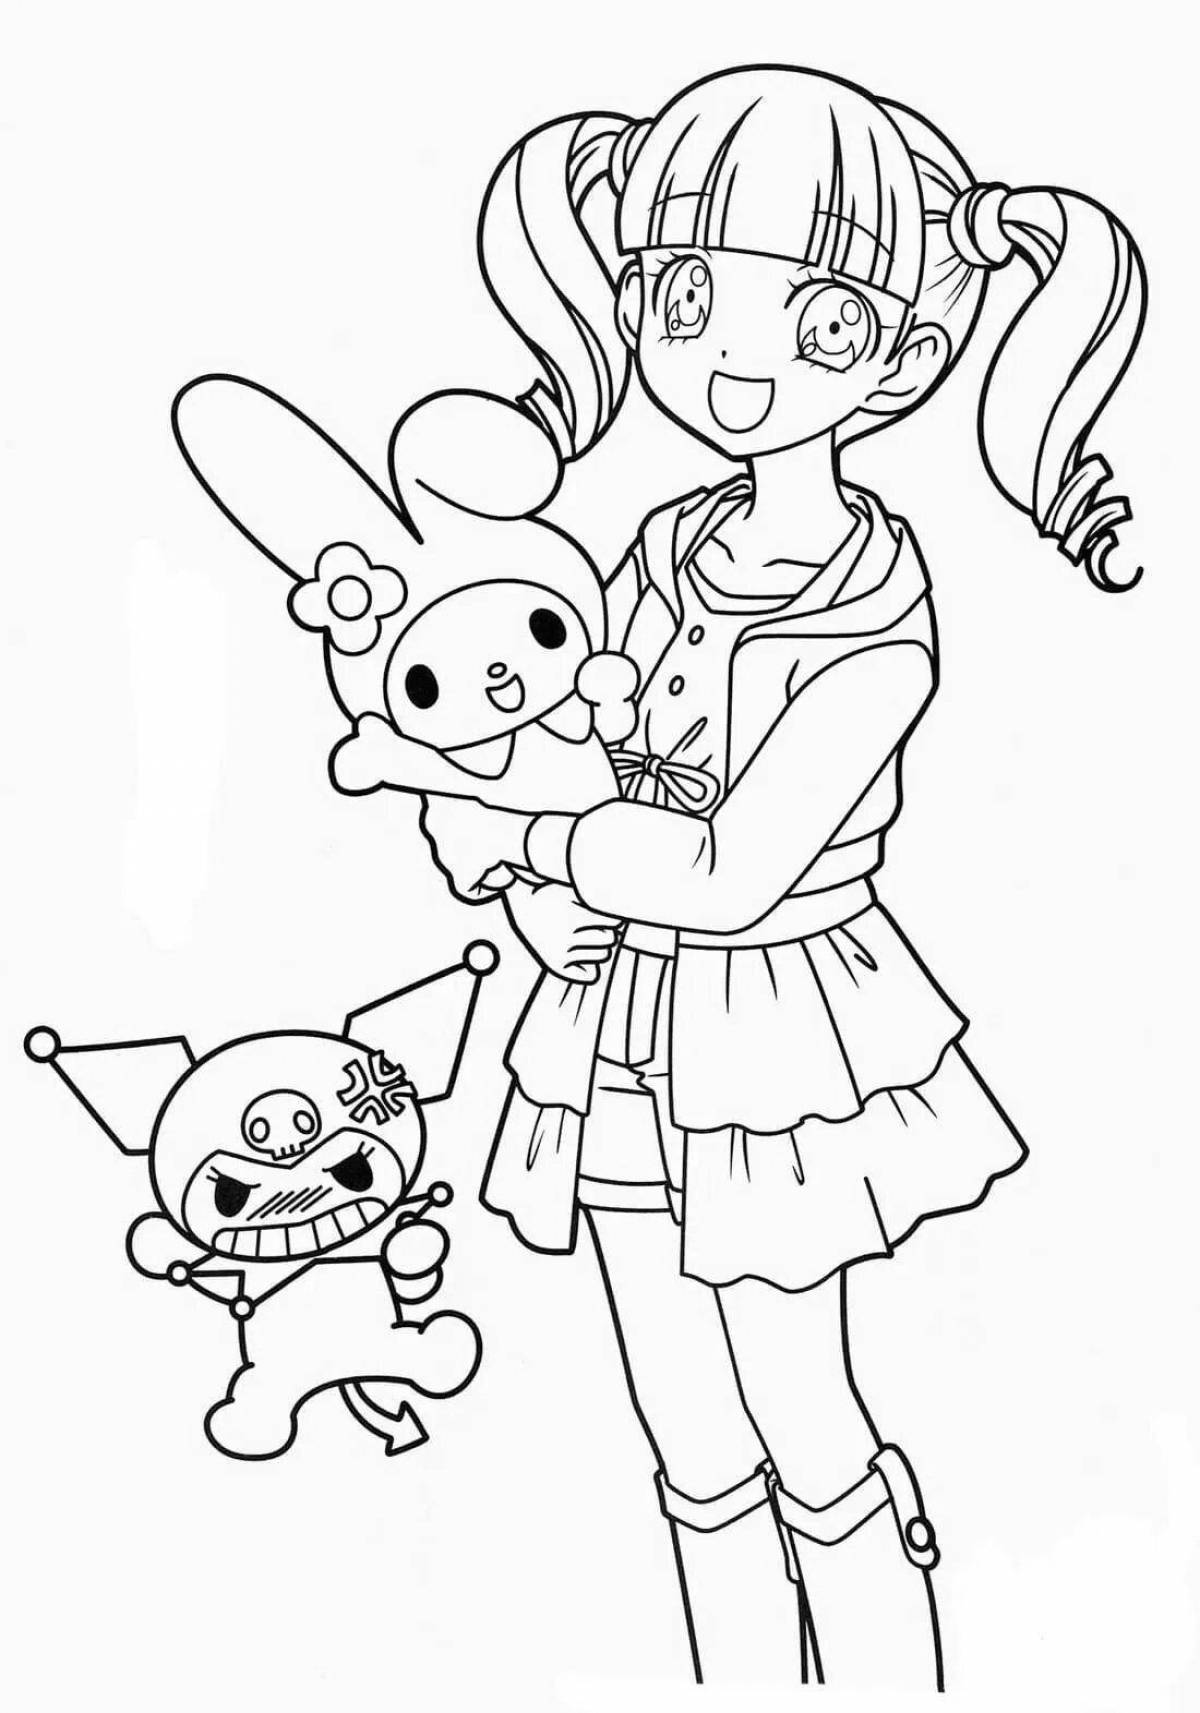 Kuromi's charming melody coloring page